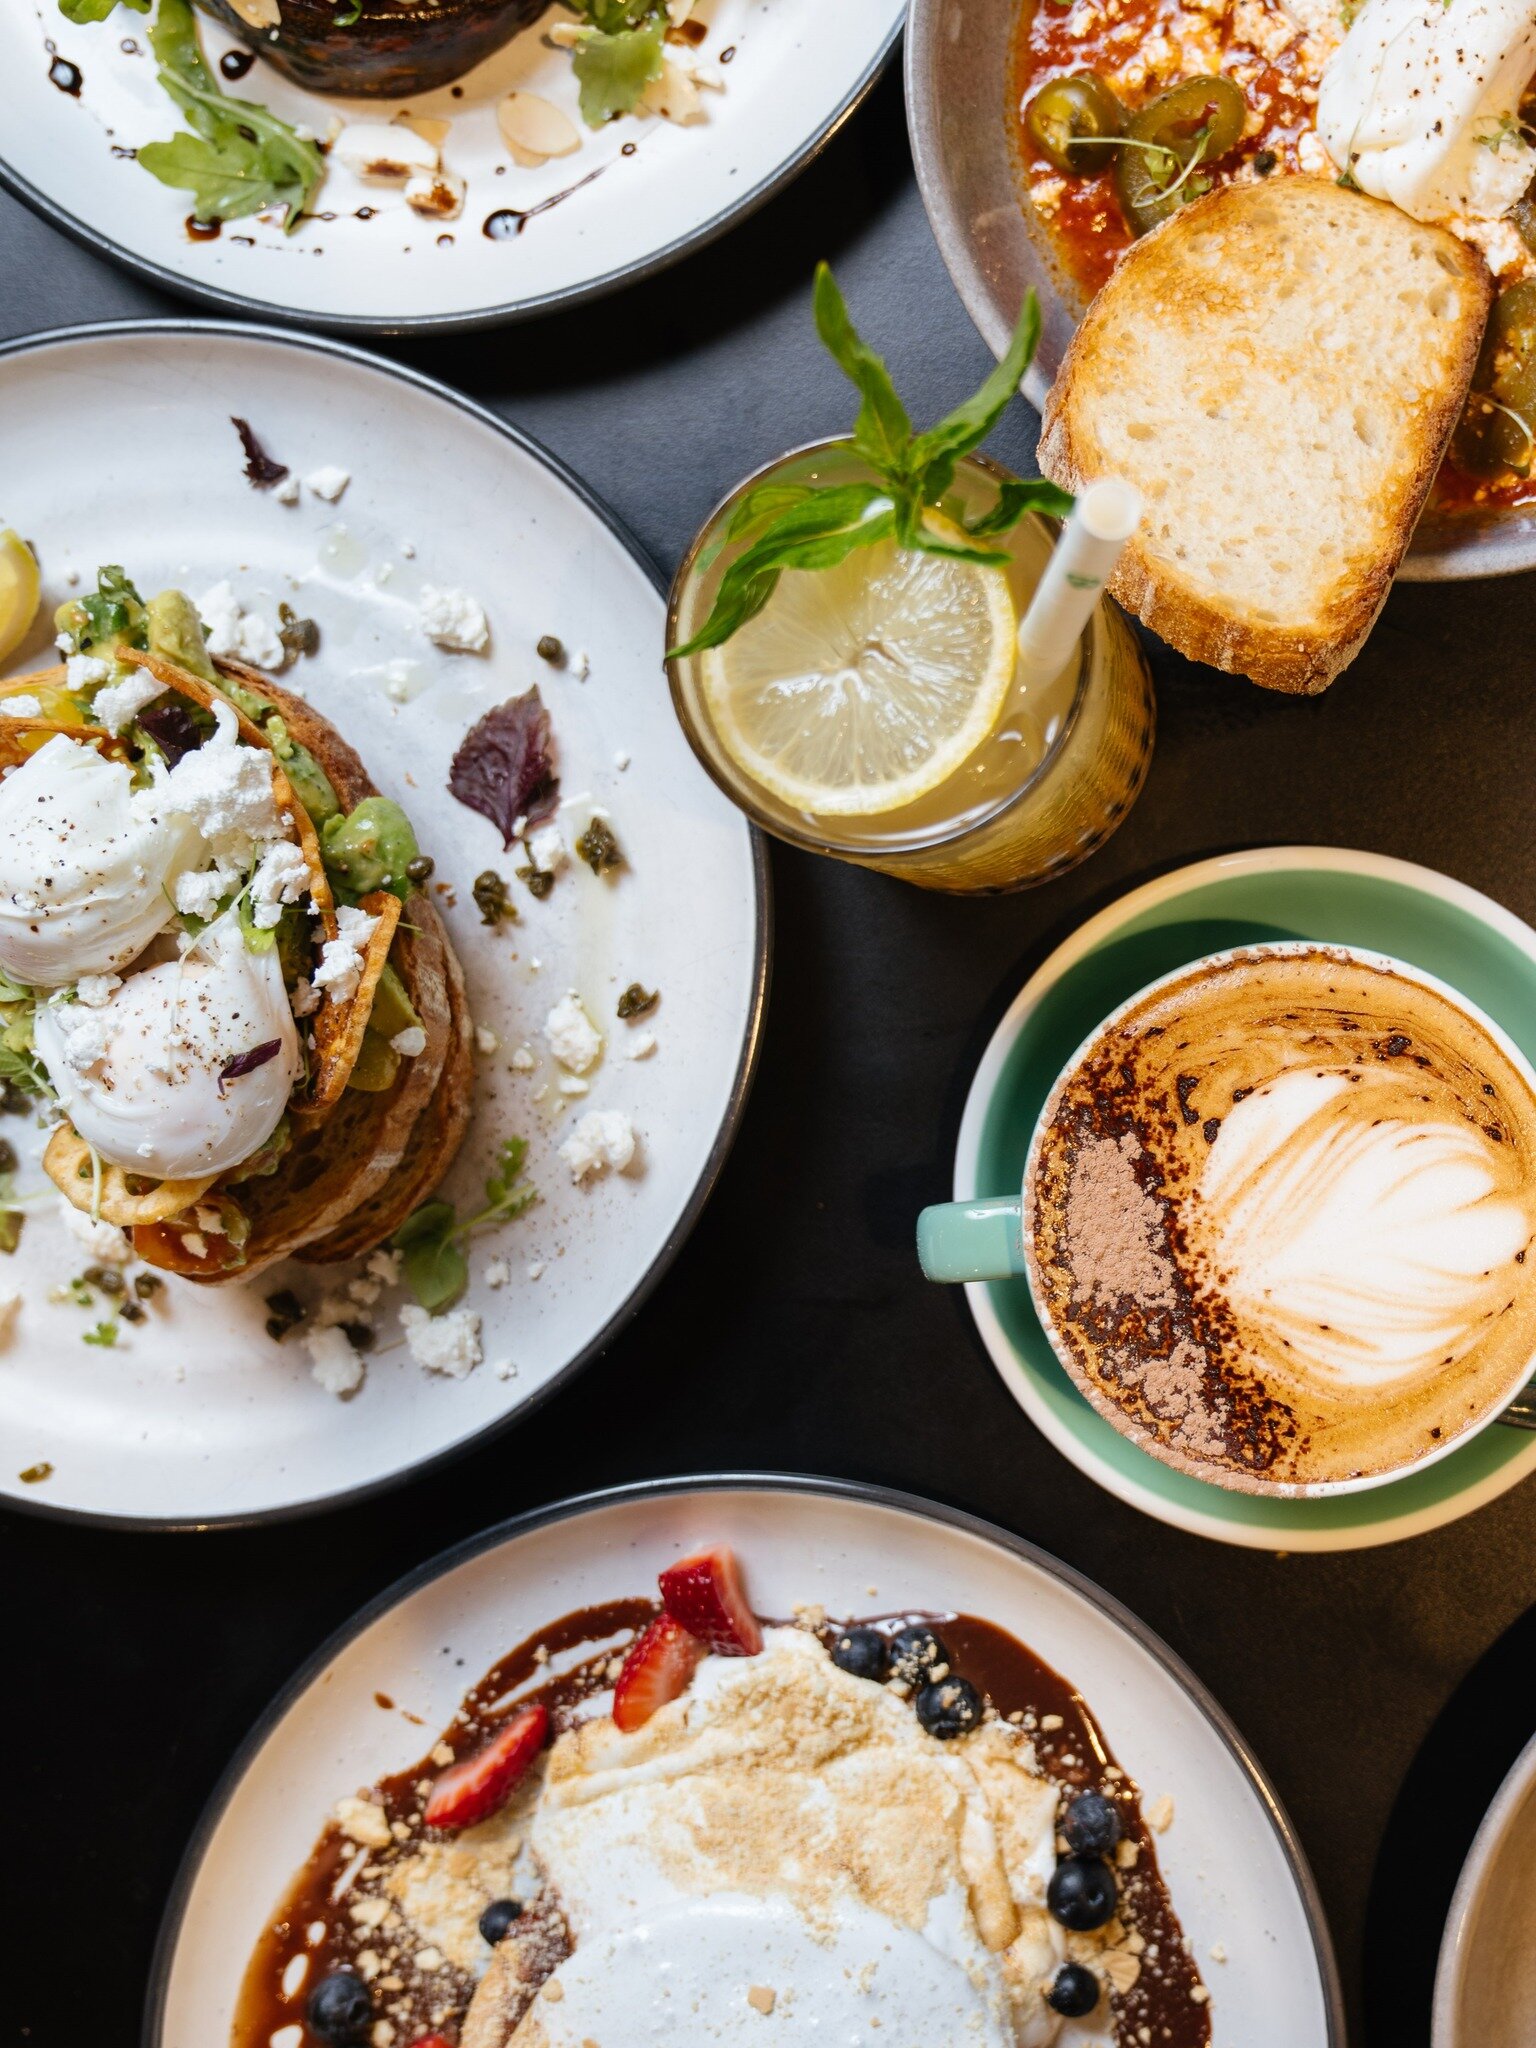 Today's forecast: strong chance of lo-fi vibes and tasty bites 😋👍

#perthbar #perthbeersnobs #perthvegans #foodofperth #goodfoodperth #cafehopperth #cafeperth #perthcafe #perthcafes #perthcafescene #perthcafeculture #bestcafesperth #coffeeinperth #